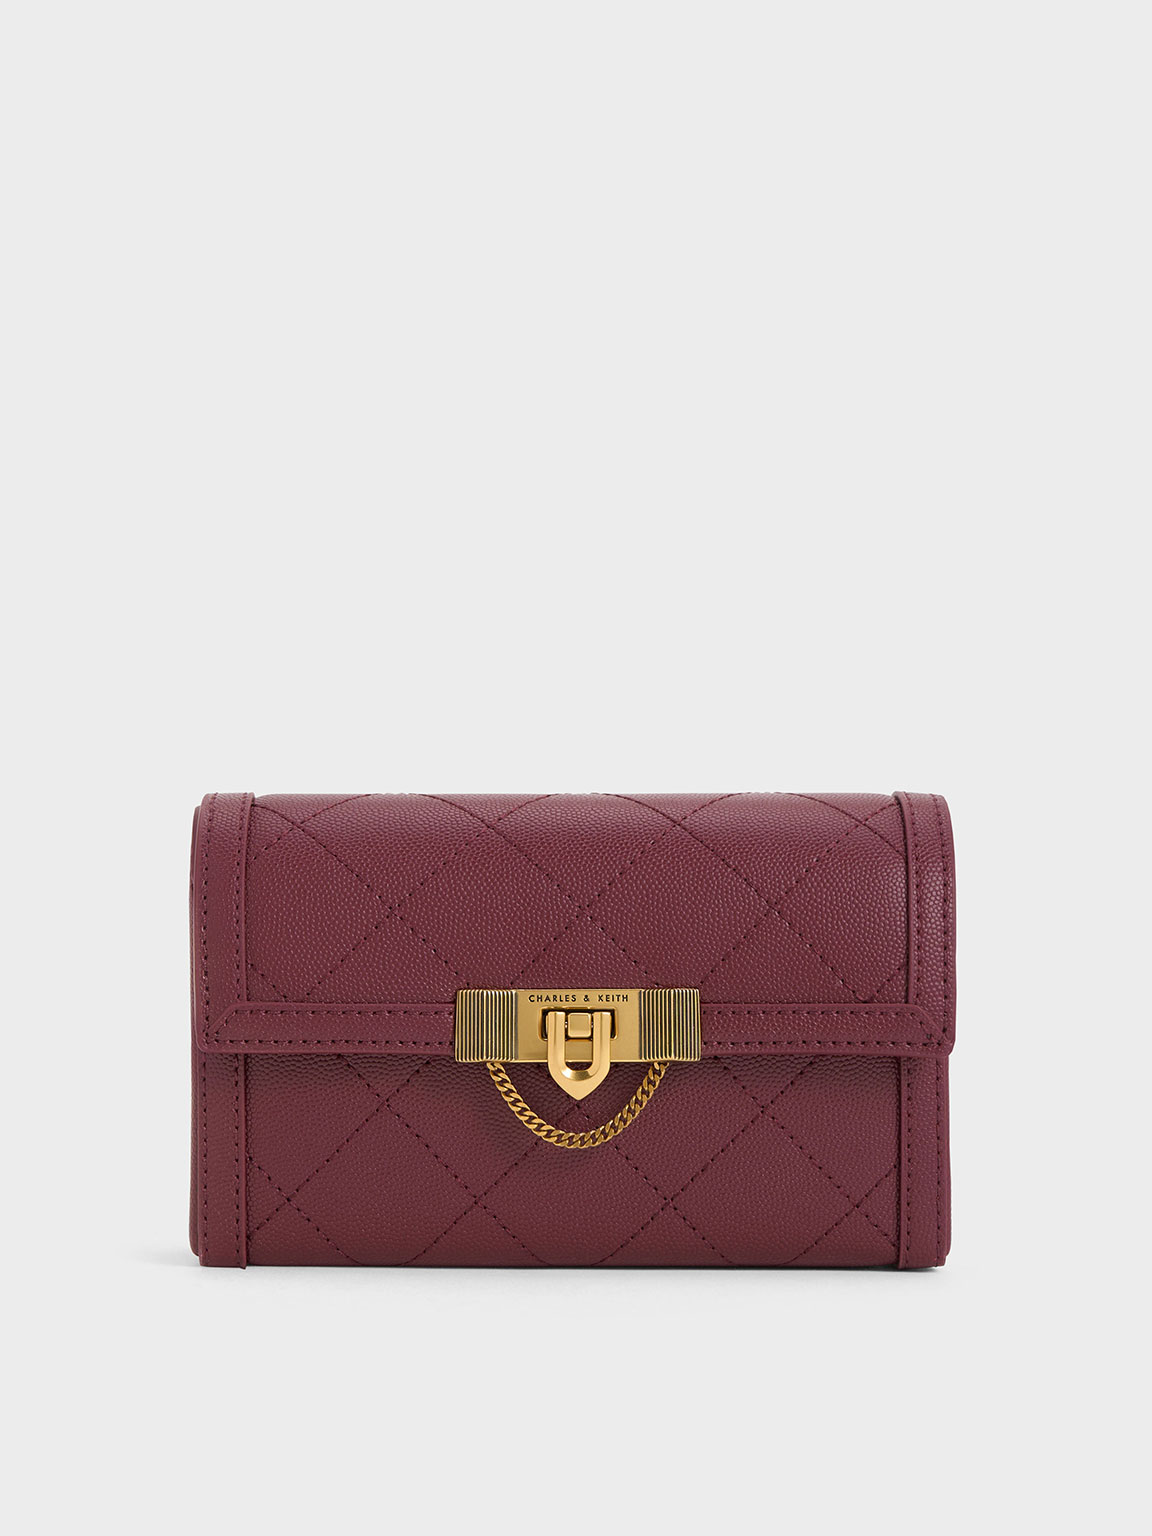 Charles & Keith Tallulah Quilted Push-lock Clutch In Burgundy